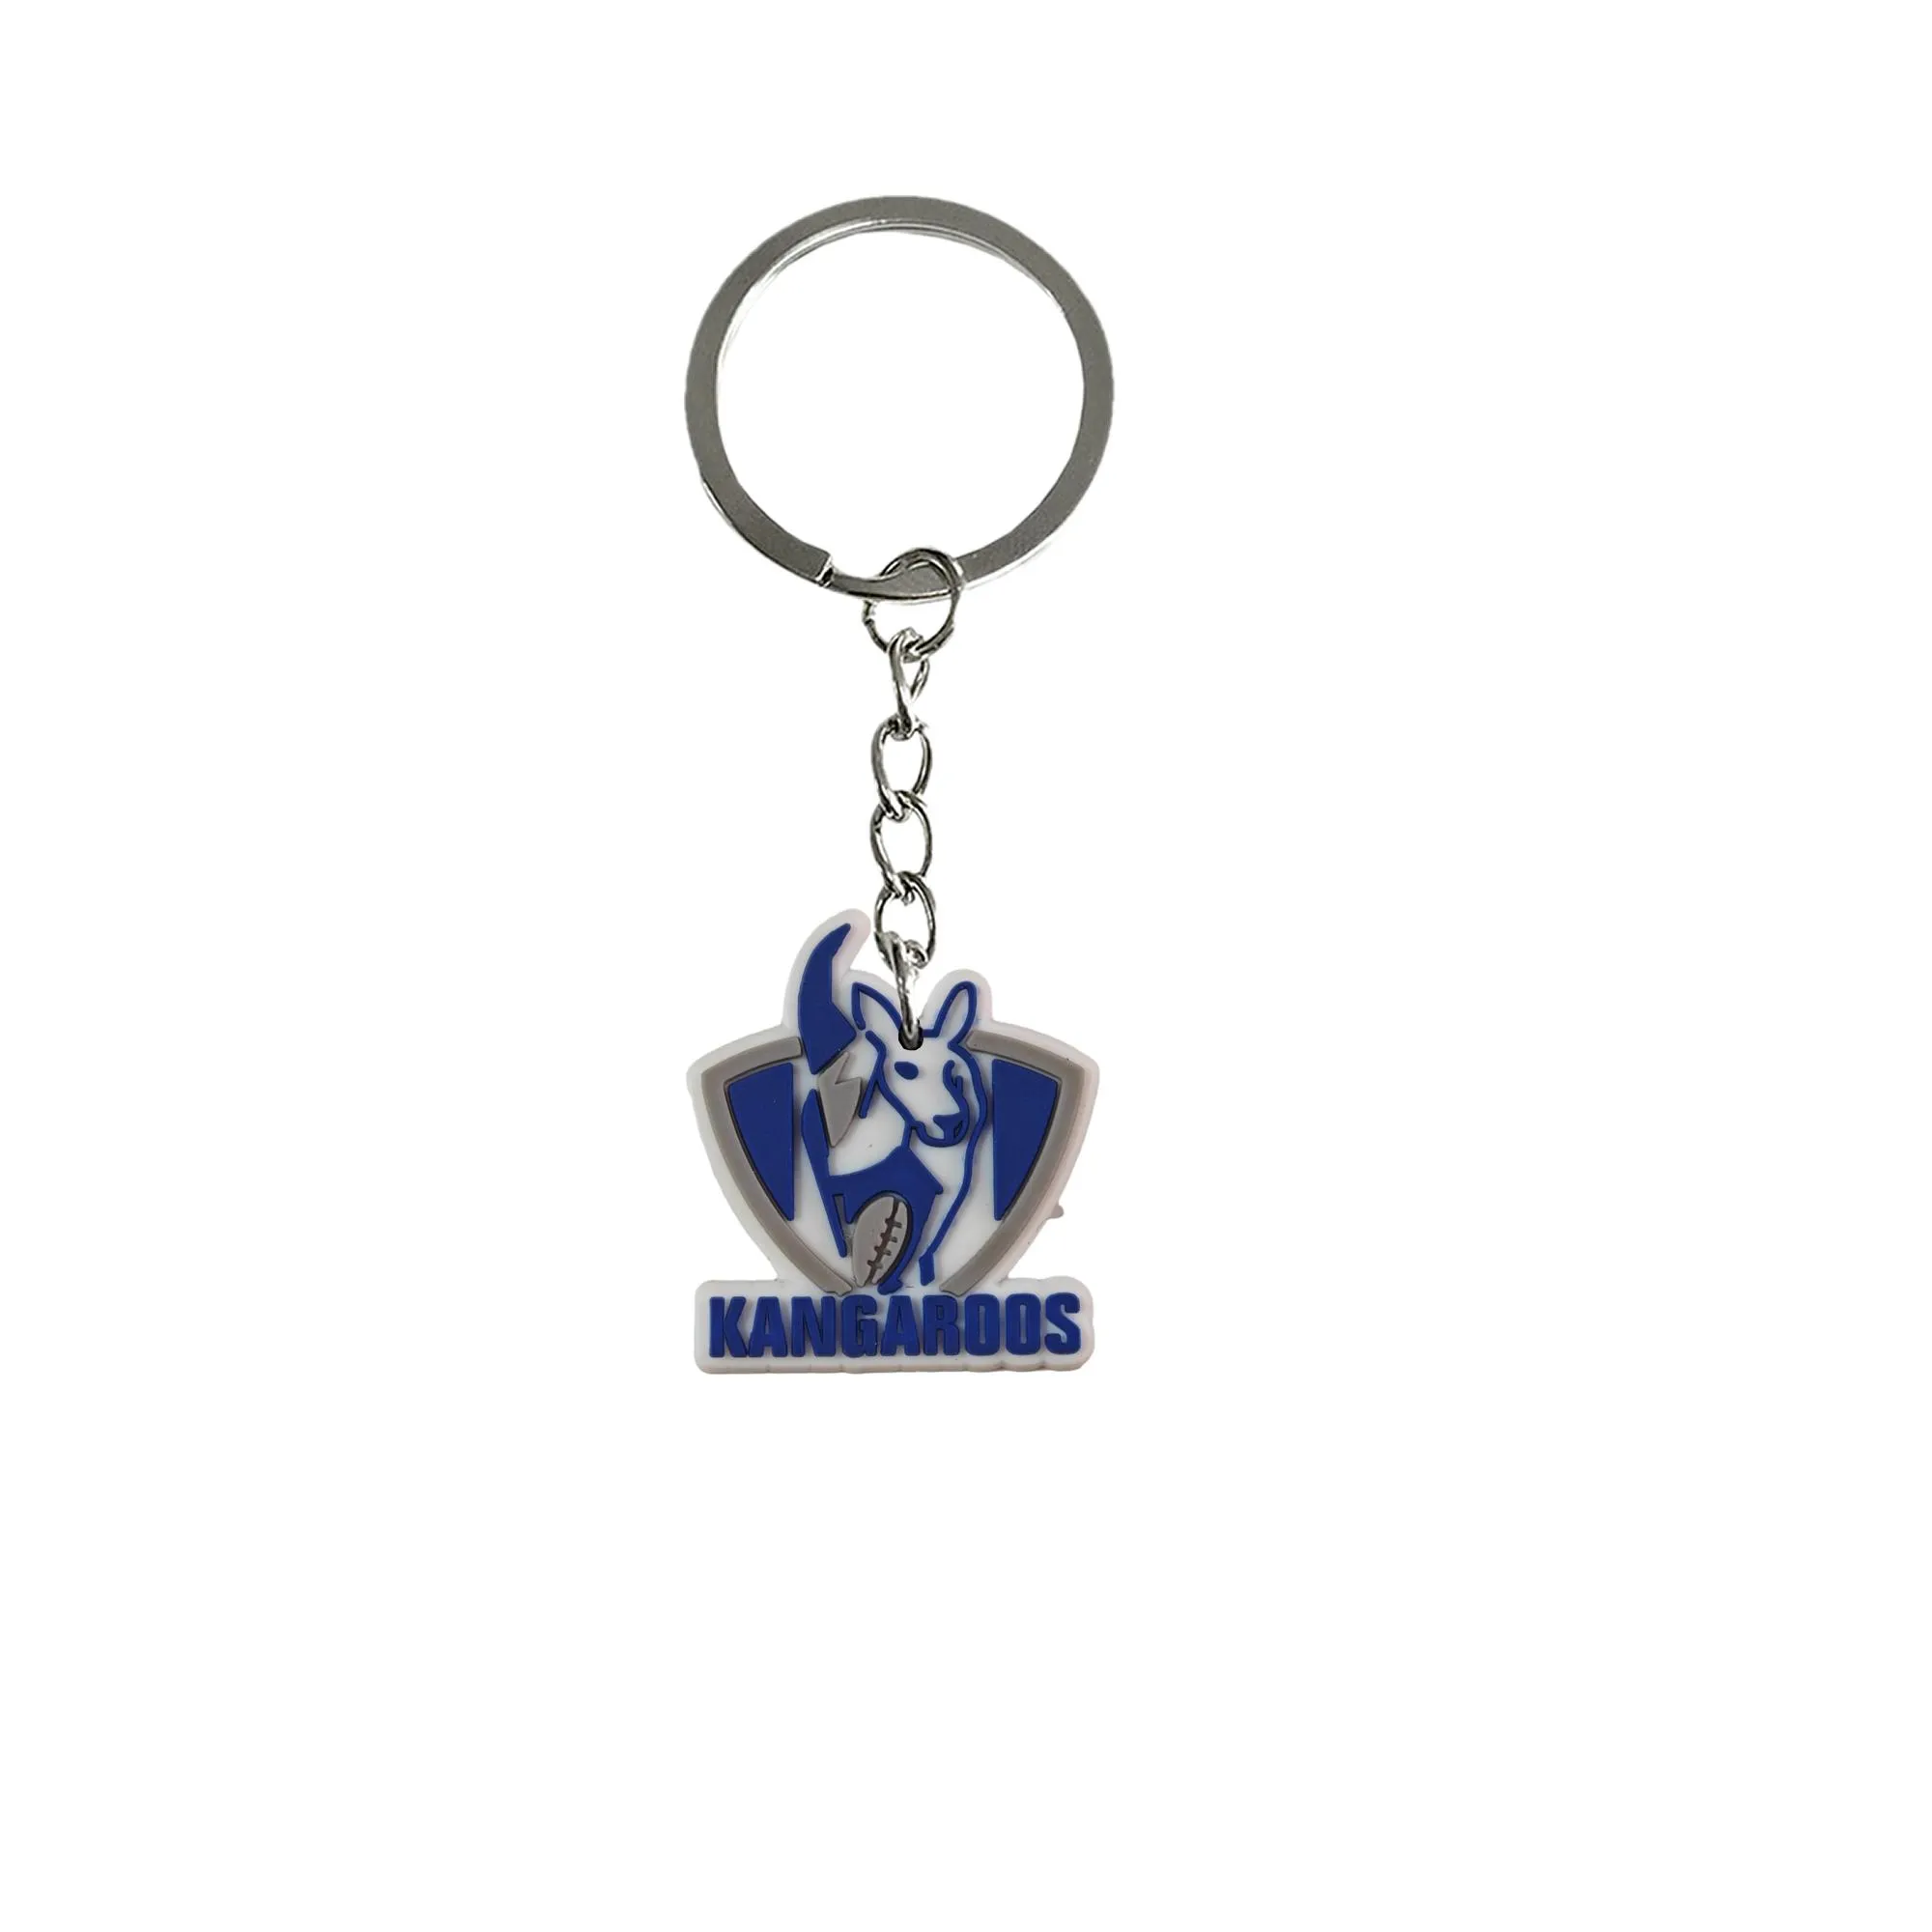 sports logo keychain keychains for school day birthday party supplies gift goodie bag stuffers backpack keyring suitable schoolbag couple key chains women car